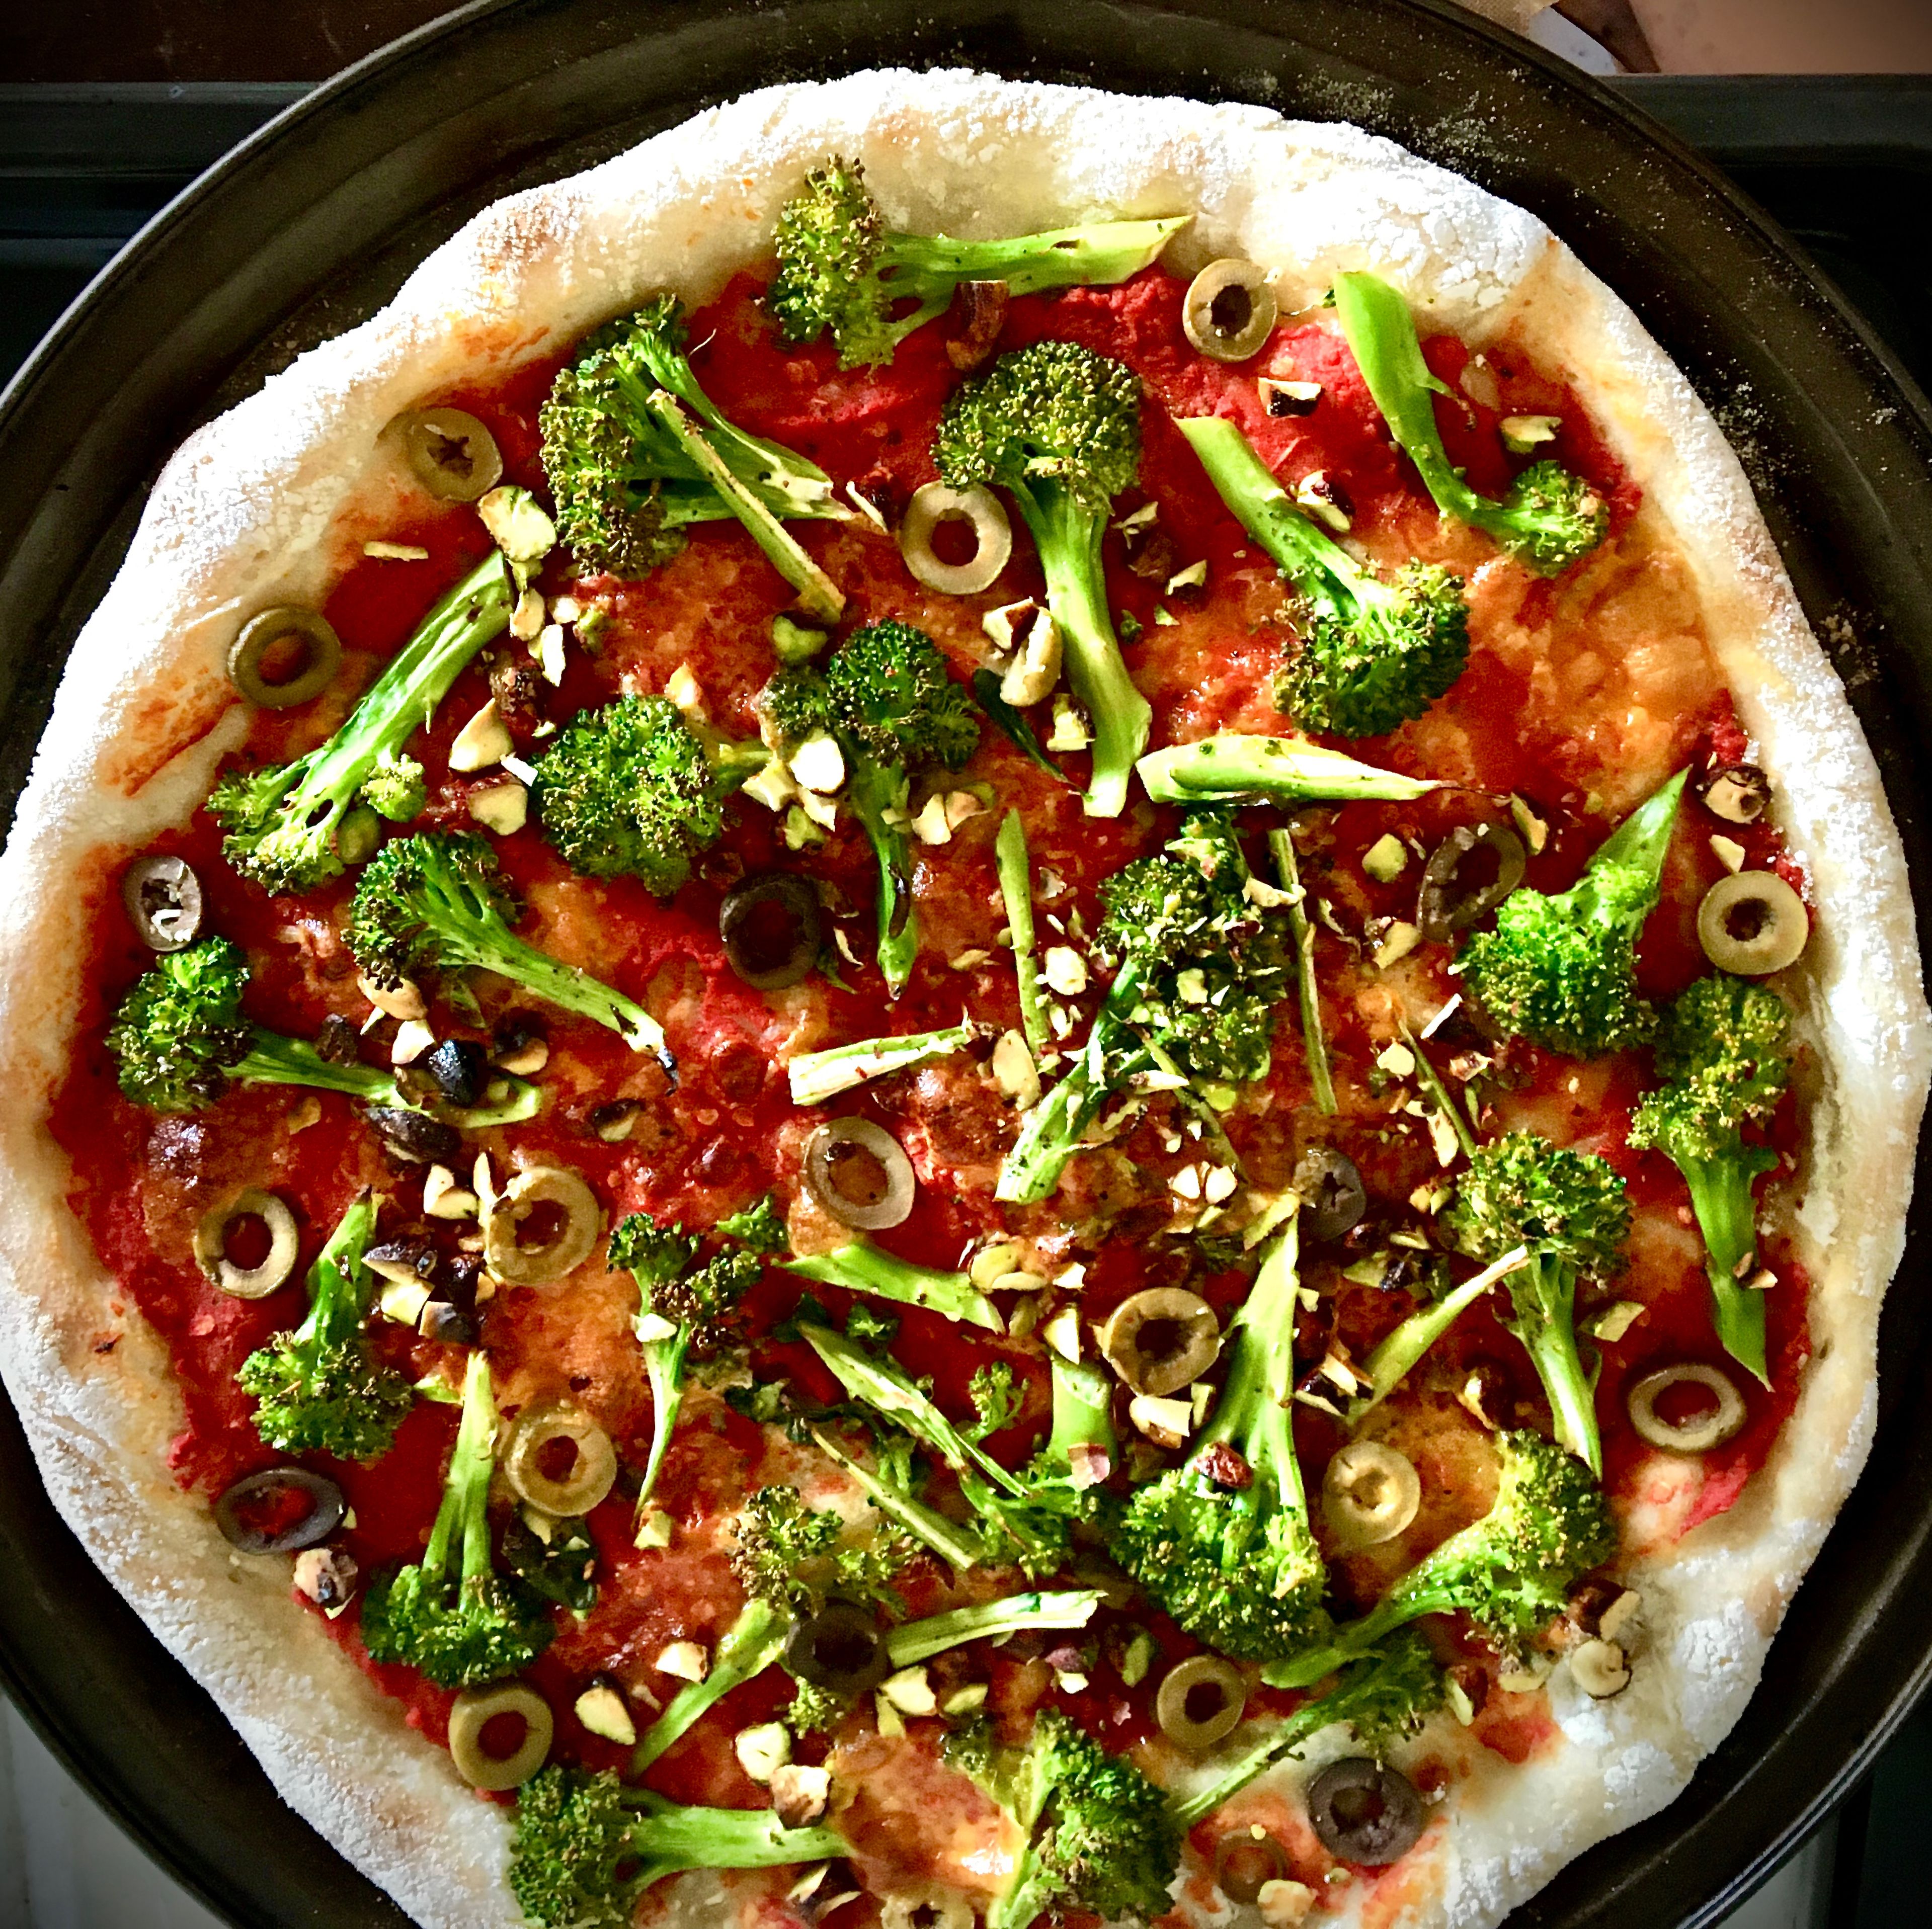 Repeat shape&stretch step with remaining dough. Place onto the second baking dish. Spread tomato sauce over and drizzle with olive oil. Arrange broccoli, remaining olives and pistachios on top. Bake for 8-10 min. Cool a bit, then dollop the pesto sauce here and there.